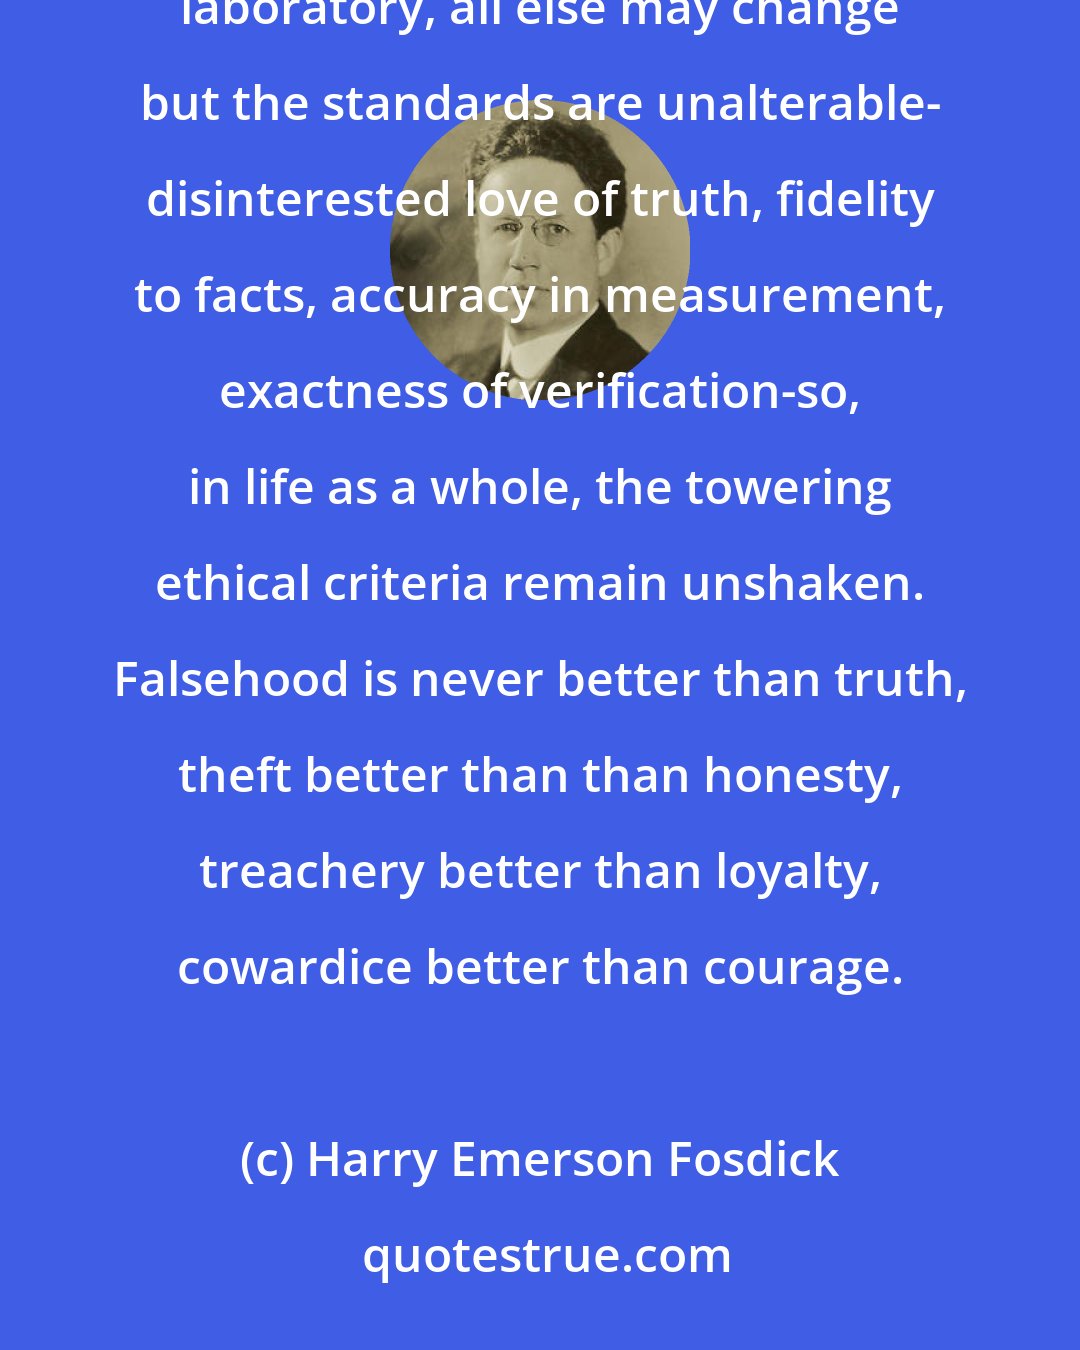 Harry Emerson Fosdick: Granted the endless variations of moral customs, still the essential standards persist. As in a scientific laboratory, all else may change but the standards are unalterable- disinterested love of truth, fidelity to facts, accuracy in measurement, exactness of verification-so, in life as a whole, the towering ethical criteria remain unshaken. Falsehood is never better than truth, theft better than than honesty, treachery better than loyalty, cowardice better than courage.